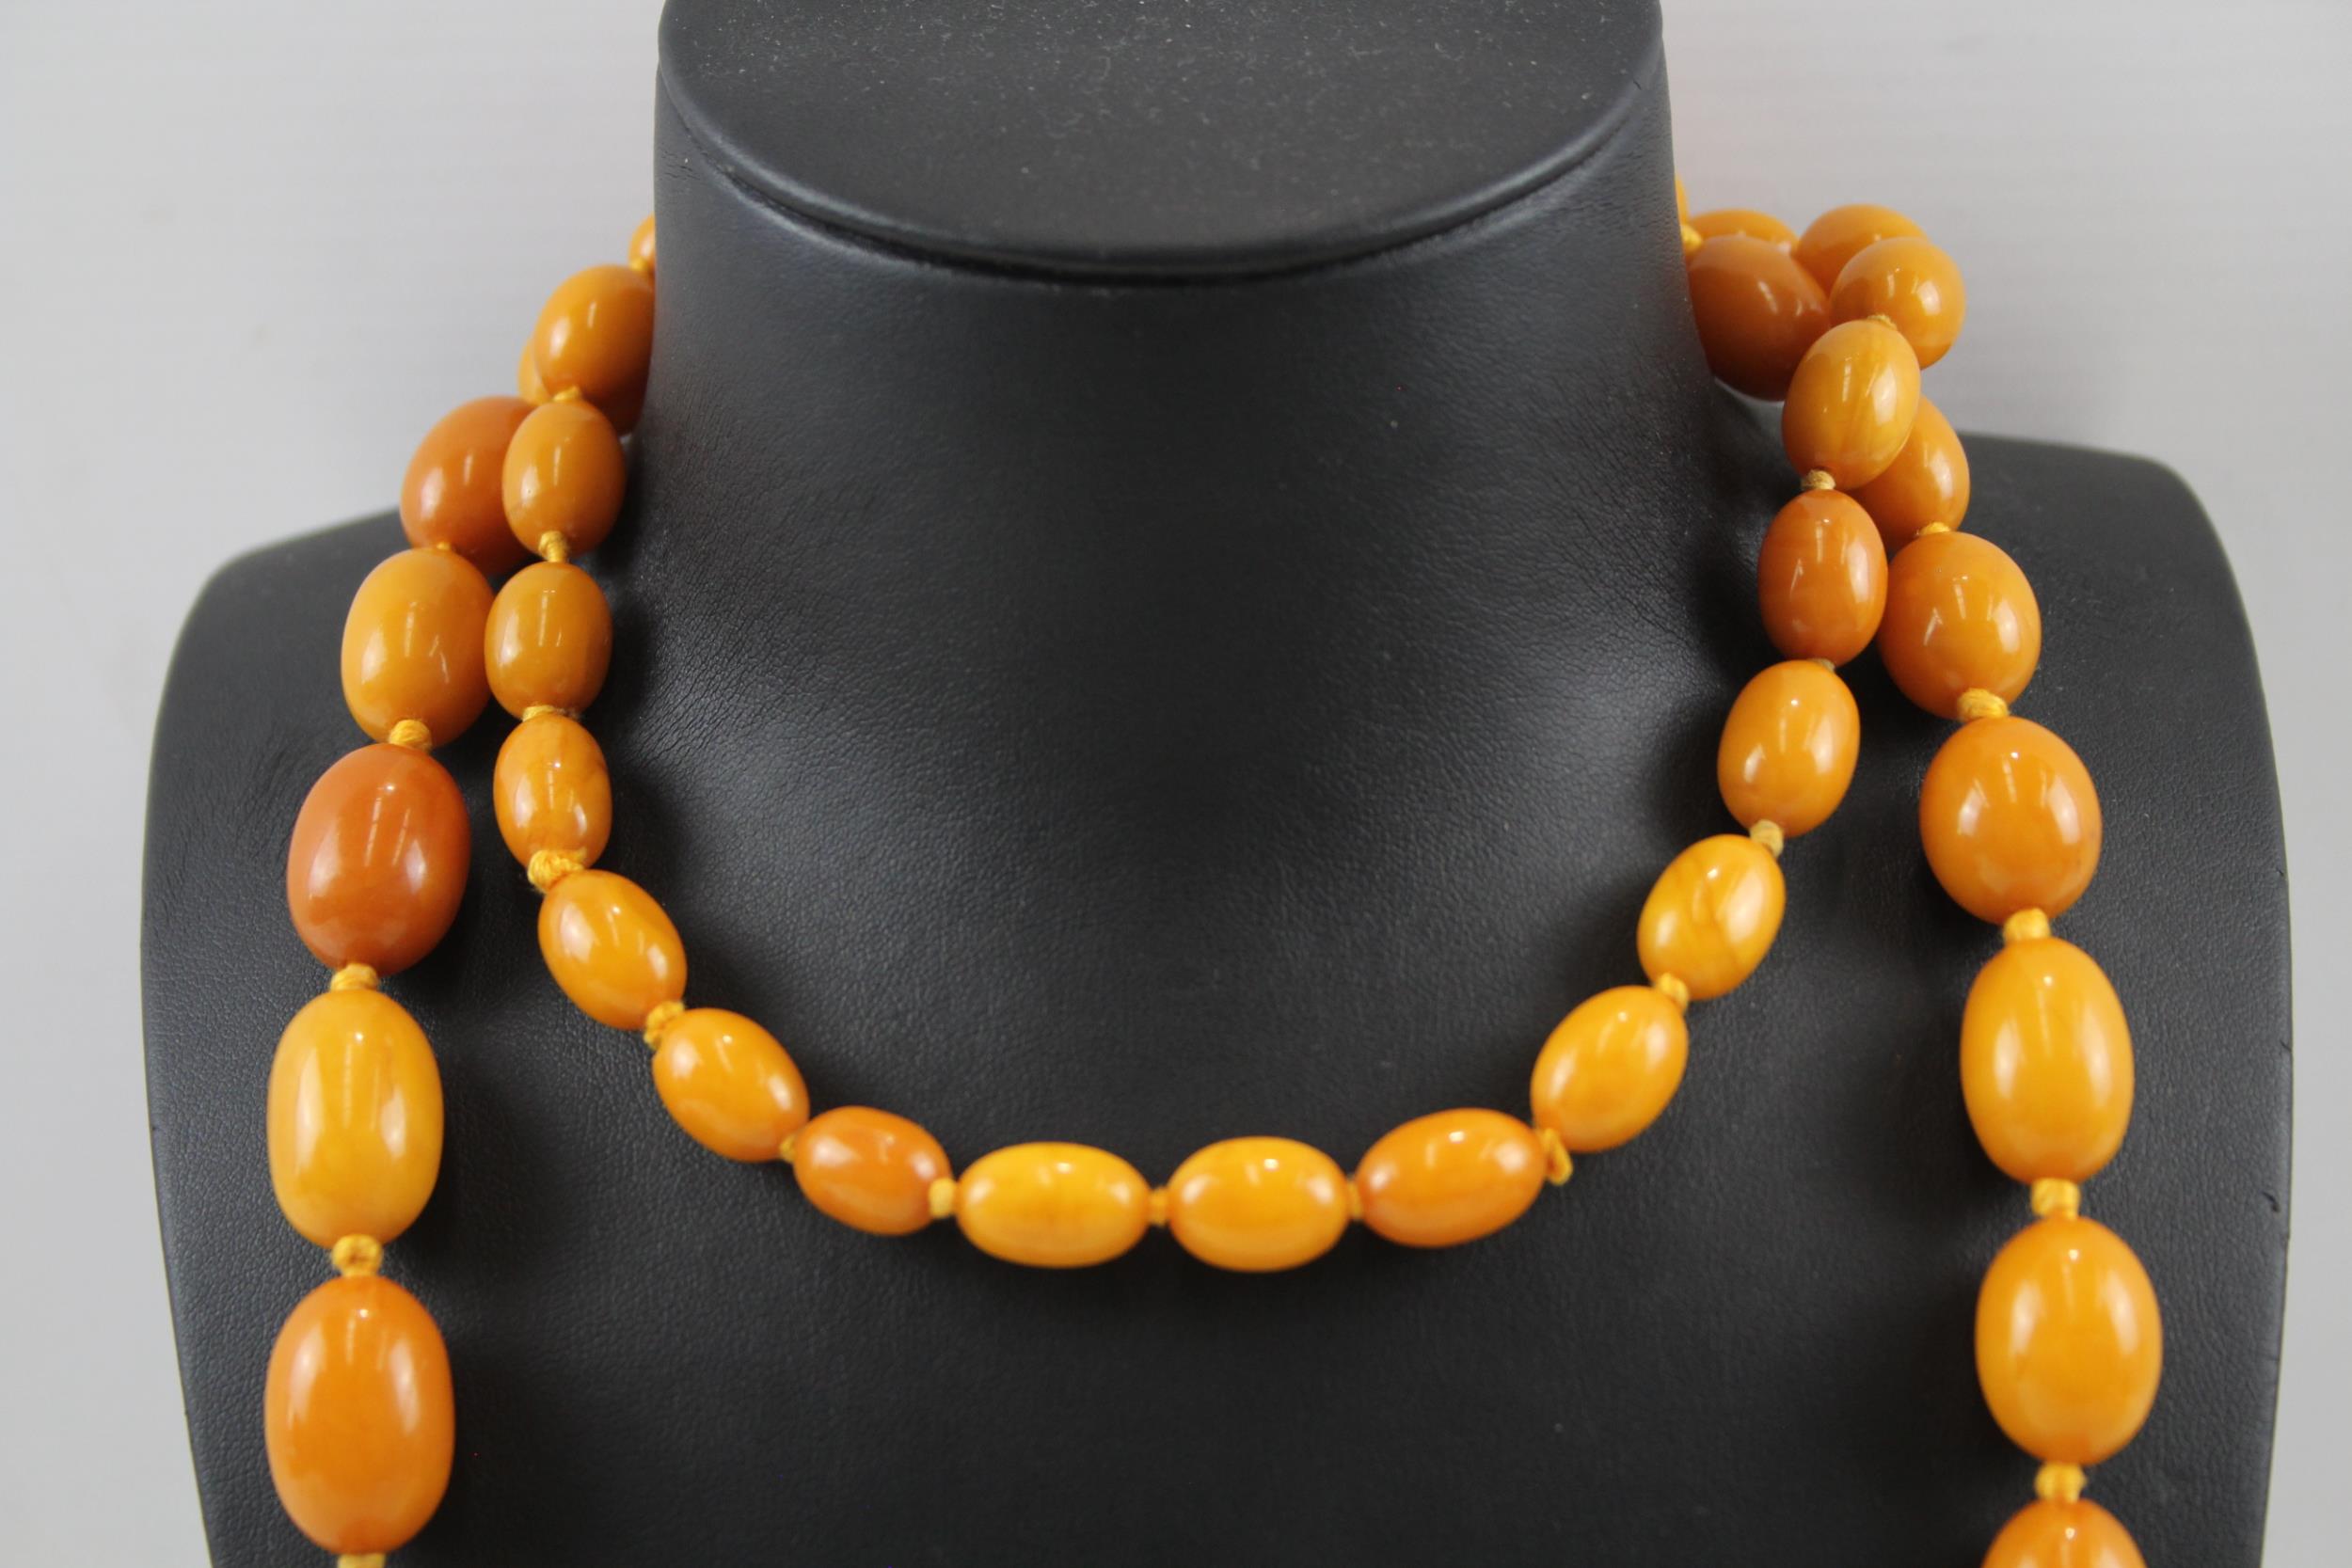 Bakelite graduated necklace individually knotted (121g) - Image 2 of 5